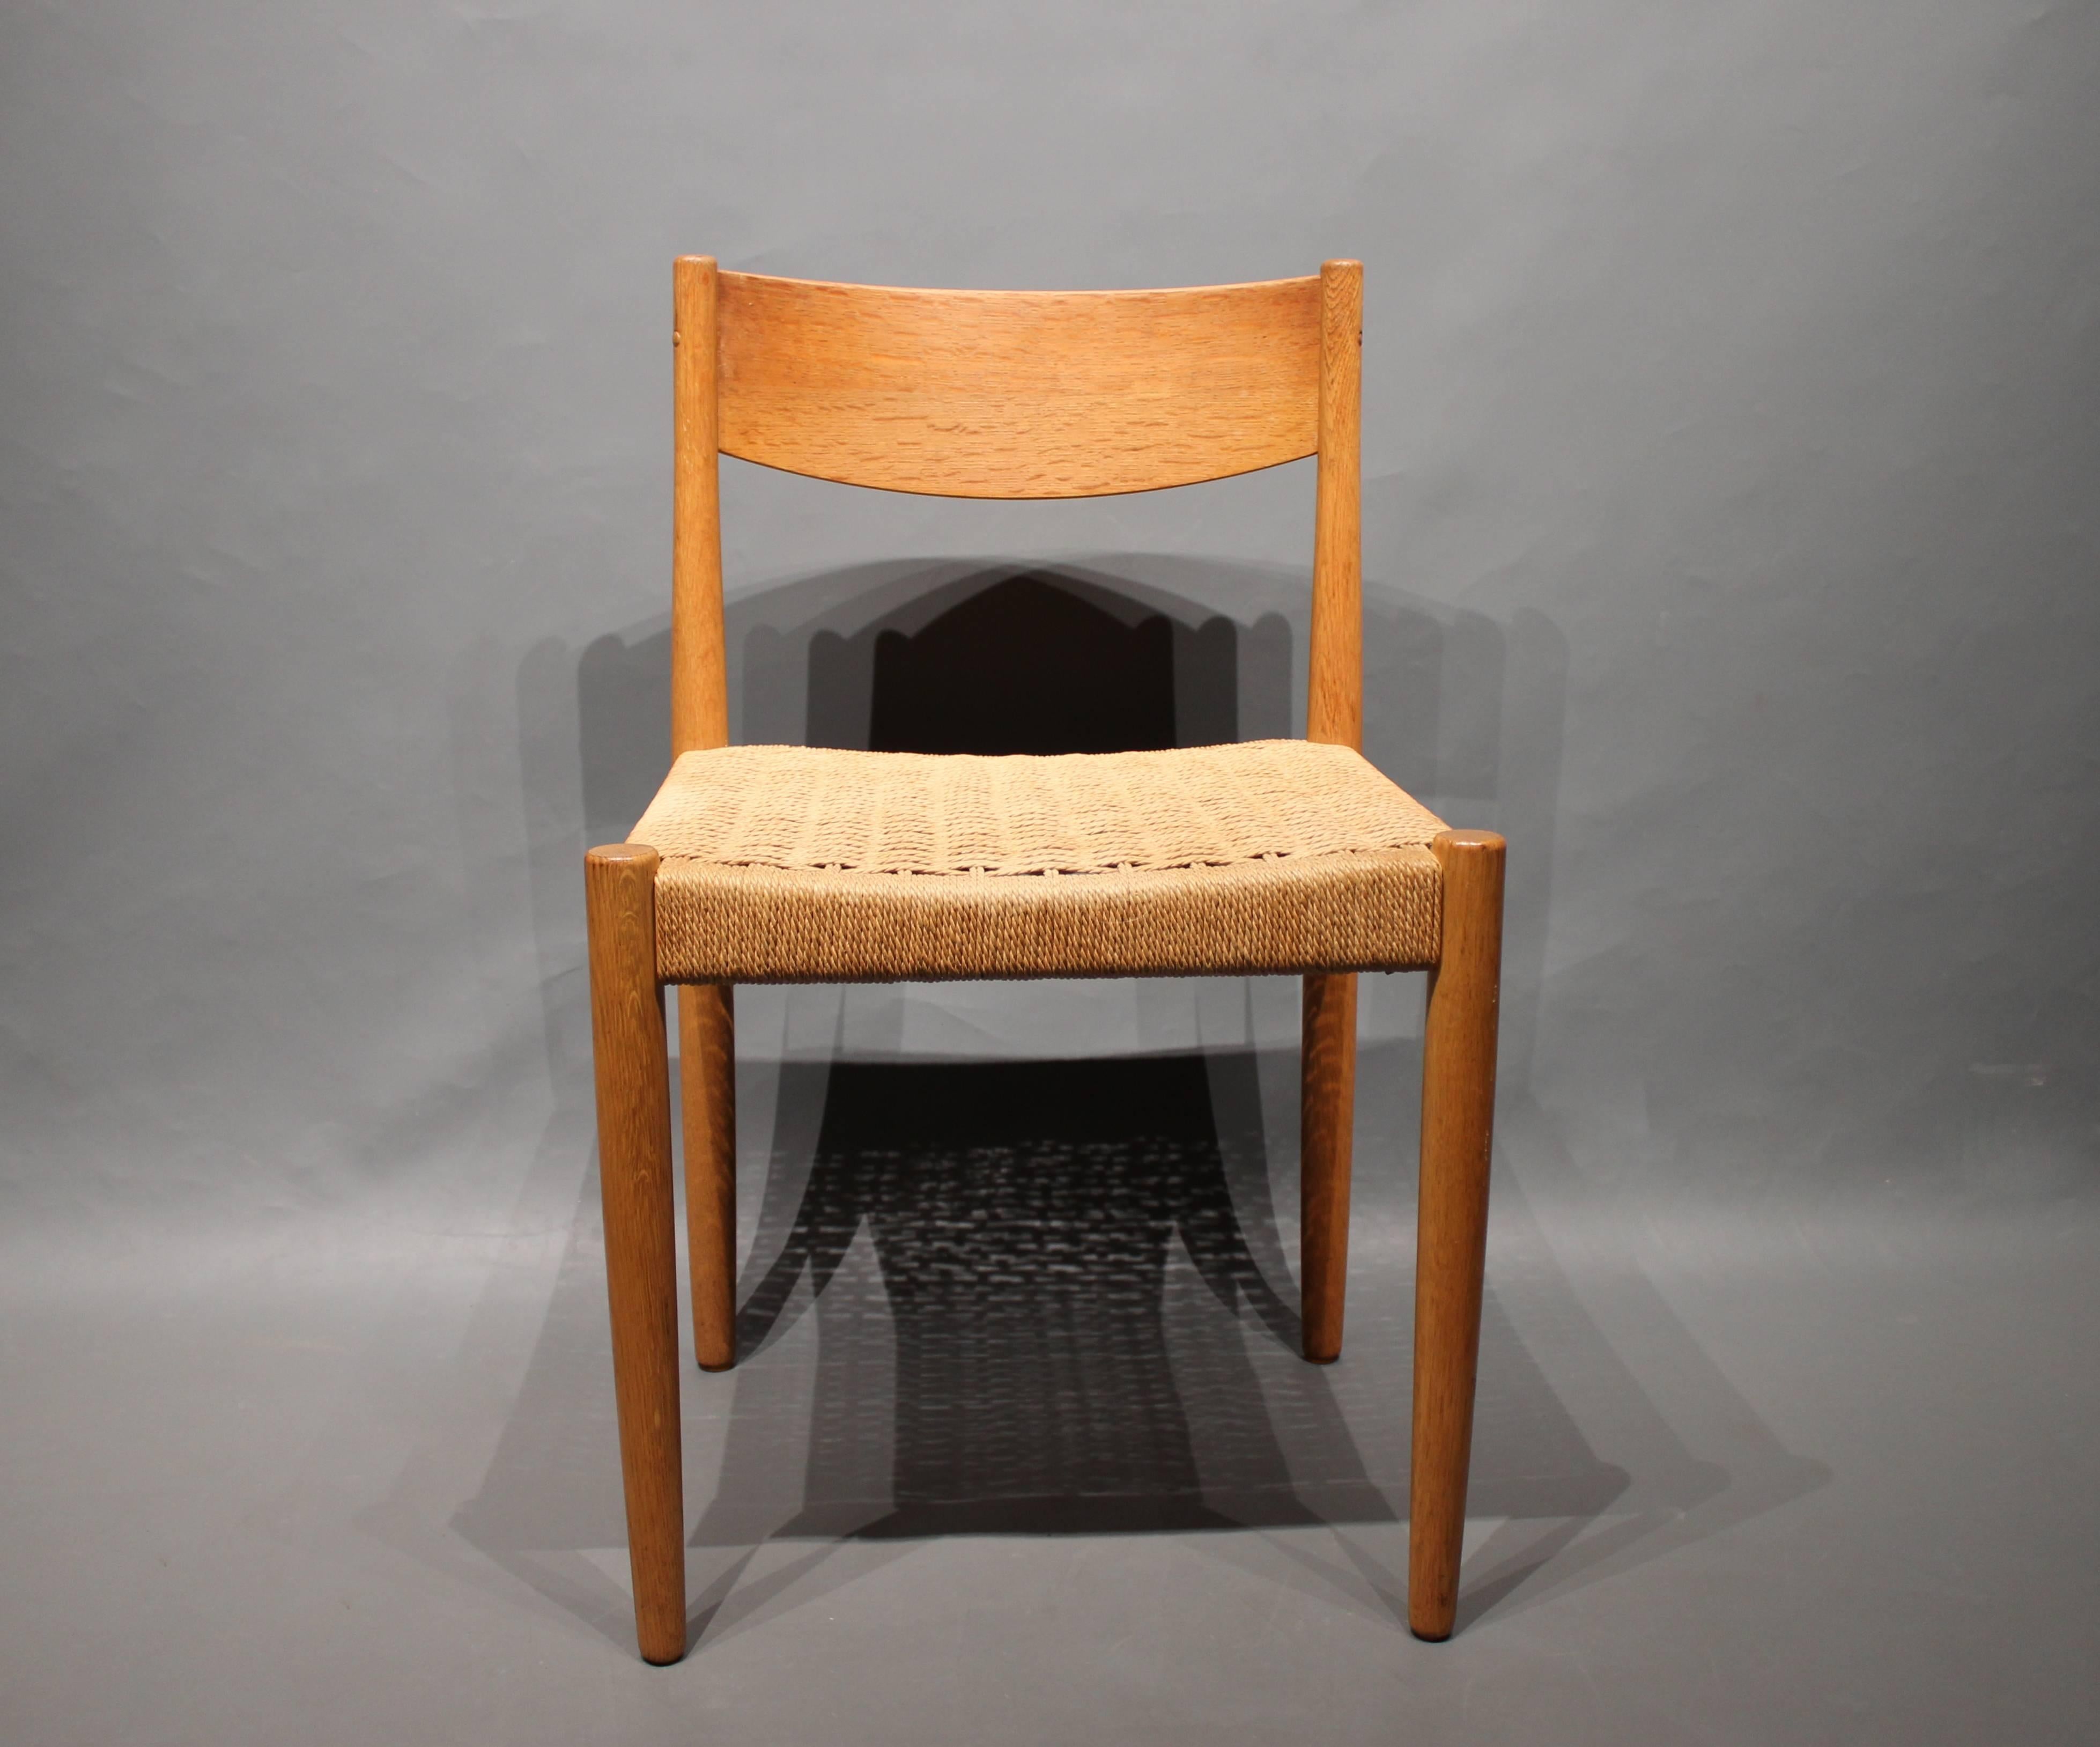 Set of six dining room chairs in oak with papercord seat designed by Poul M. Volther and manufactured by Frem Røjle. The chairs are in great vintage condition and from the 1960s.